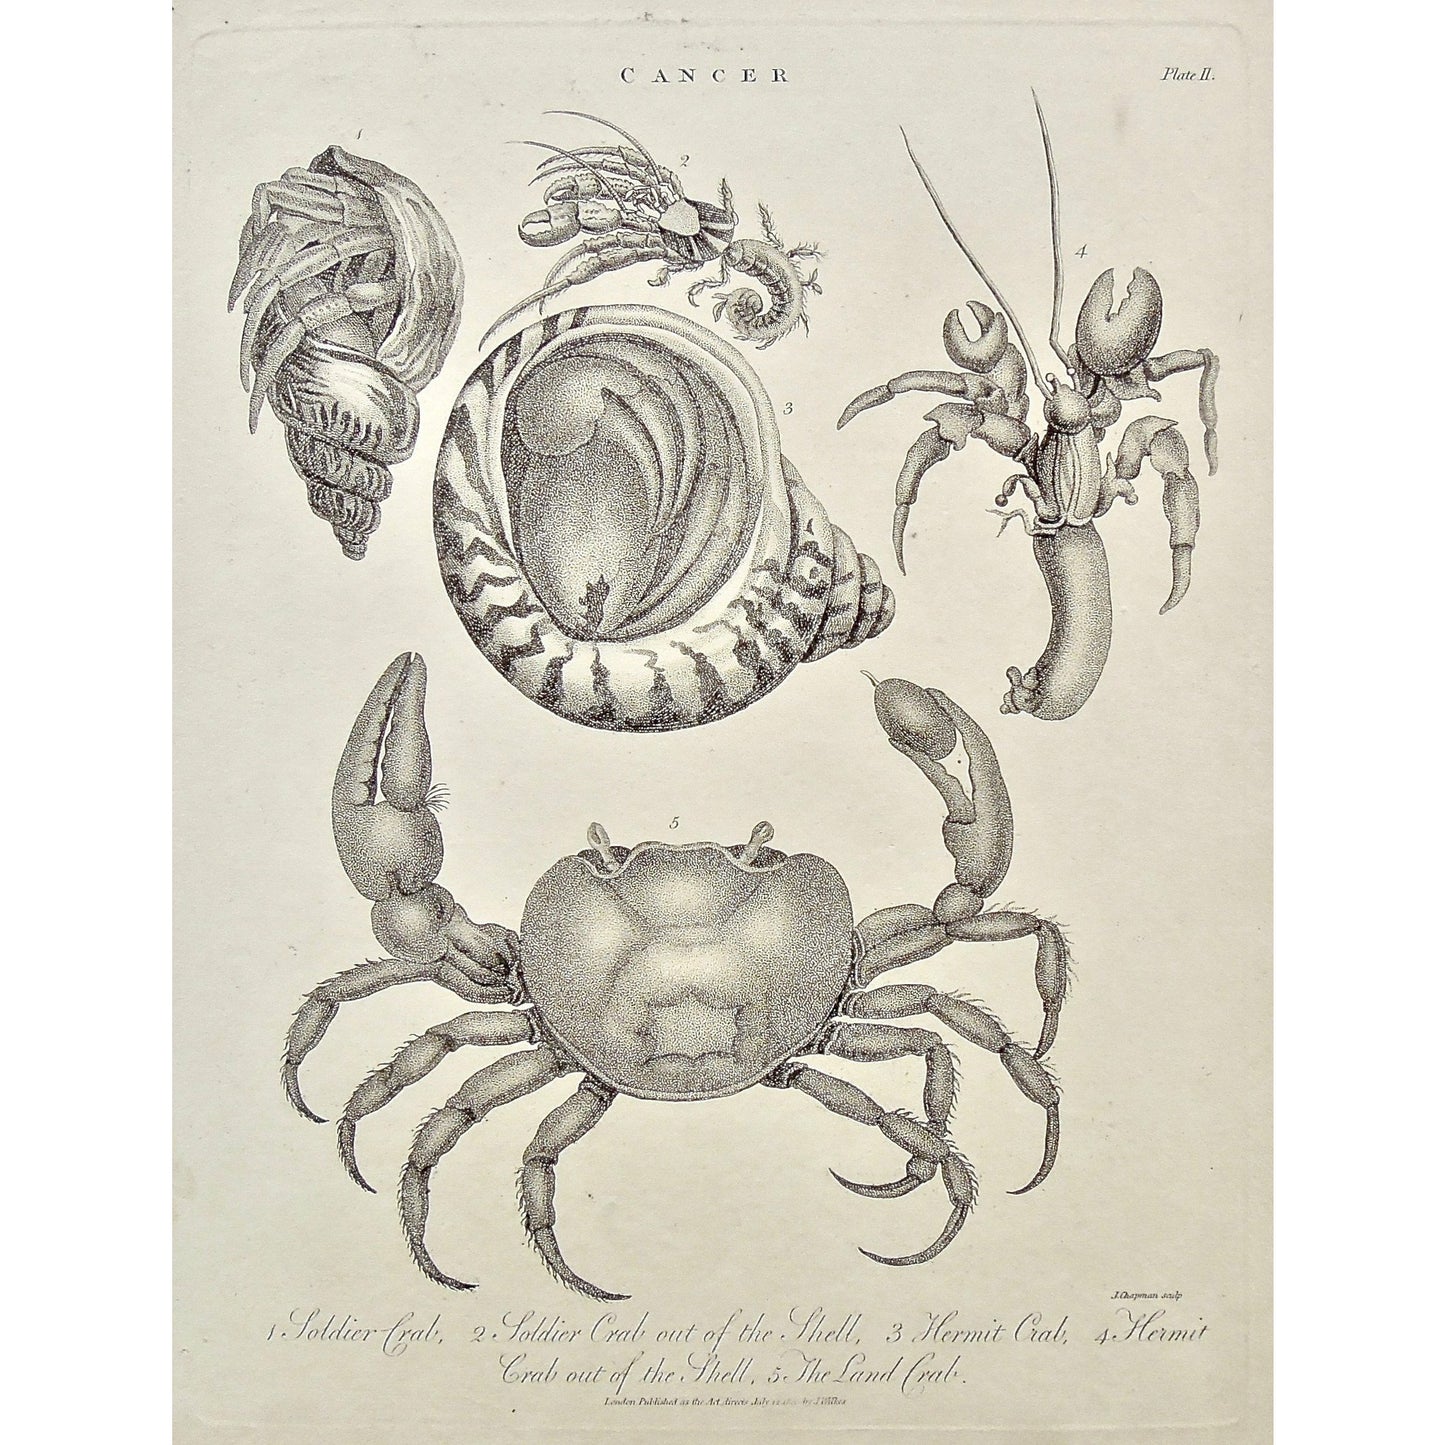 Cancer, Soldier Crab, Crab, Crabs, Soldier, Out of the shell, Hermit crab, Hermit, Land crab, land, shellfish, shell, shells, pincers, legs, Universal Dictionary, Dictionary, Encyclopaedia Londinensis, Encyclopedia, London, Antique Print, Antique, Prints, Vintage, Vintage Art, Art, Wall art, Decor, wall decor, design, engraving, original, authentic, Collectors, Collectable, rare books, rare, book, printmaking, print, printers, Wilkes, Adlard, Chapman, 1800,